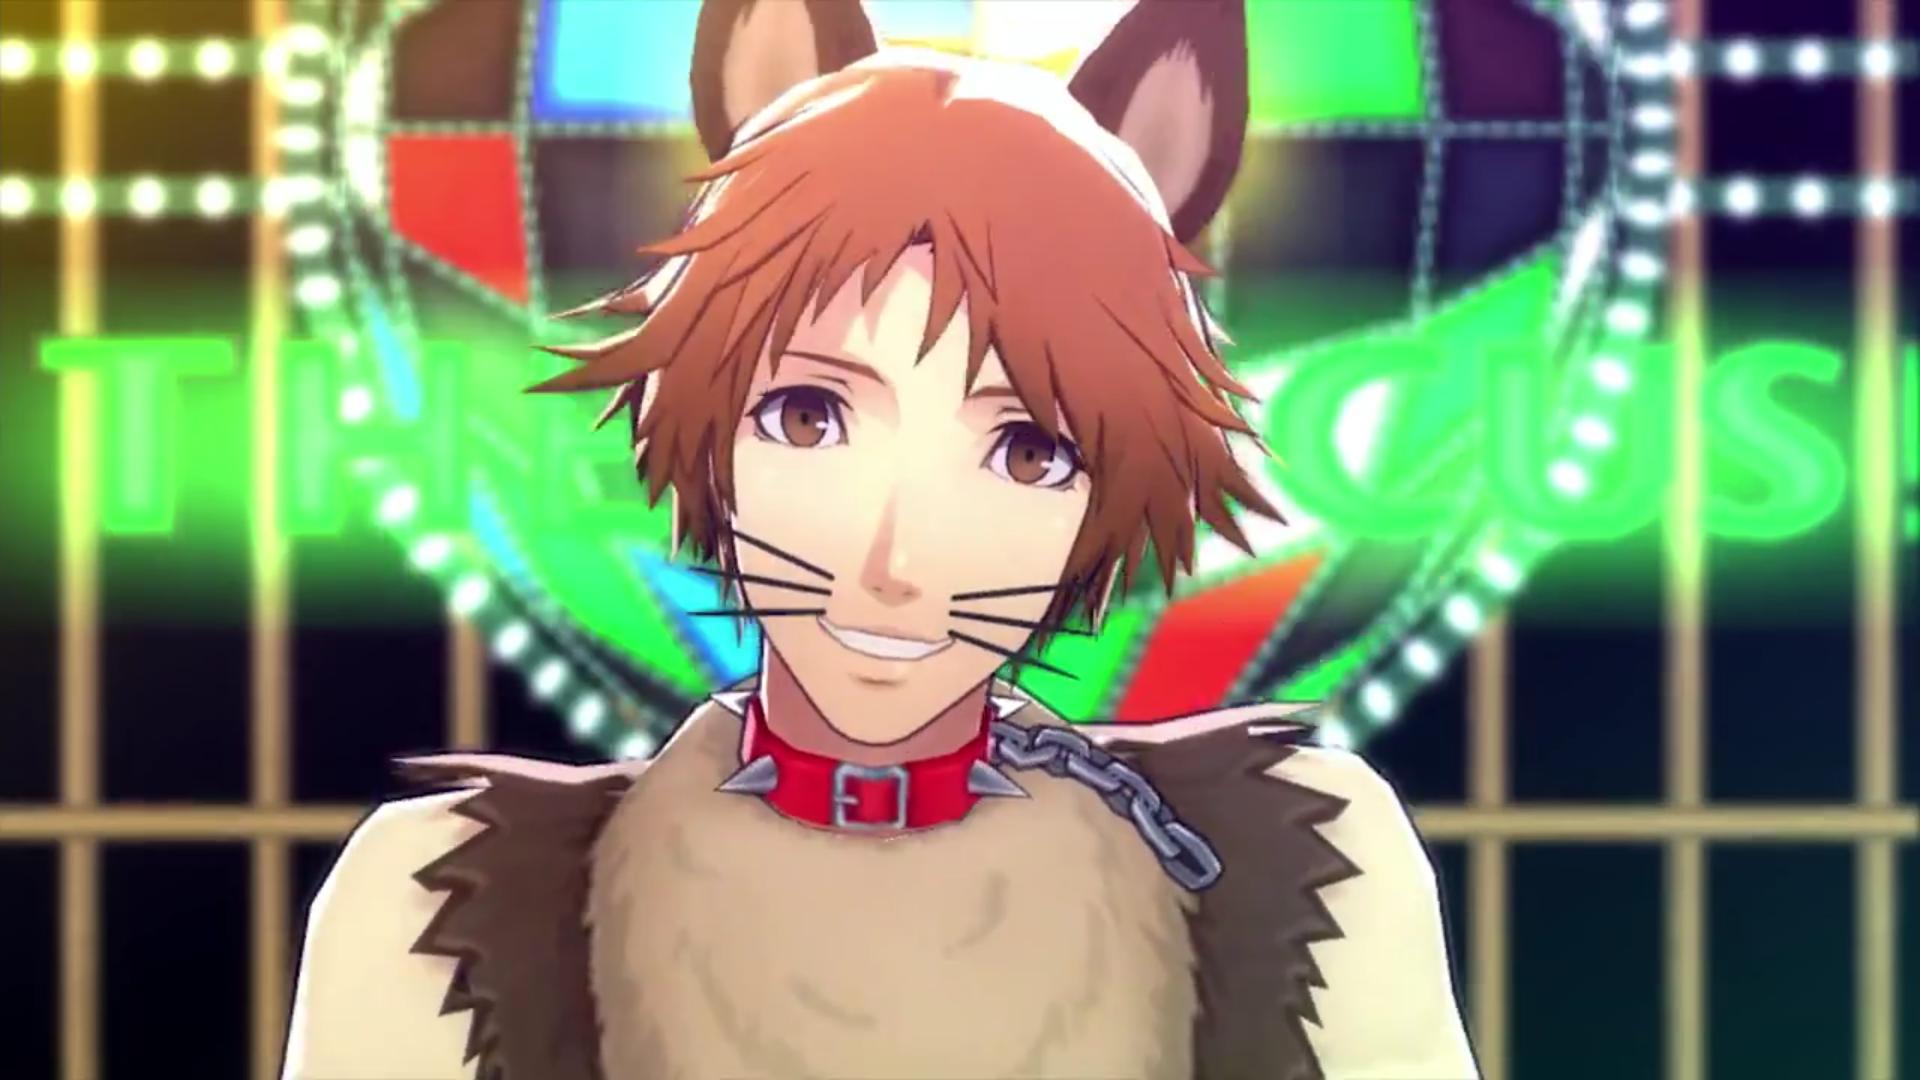 Yosuke Hanamura Shows Us His Moves and His Alternate Costumes in a New P4D Video